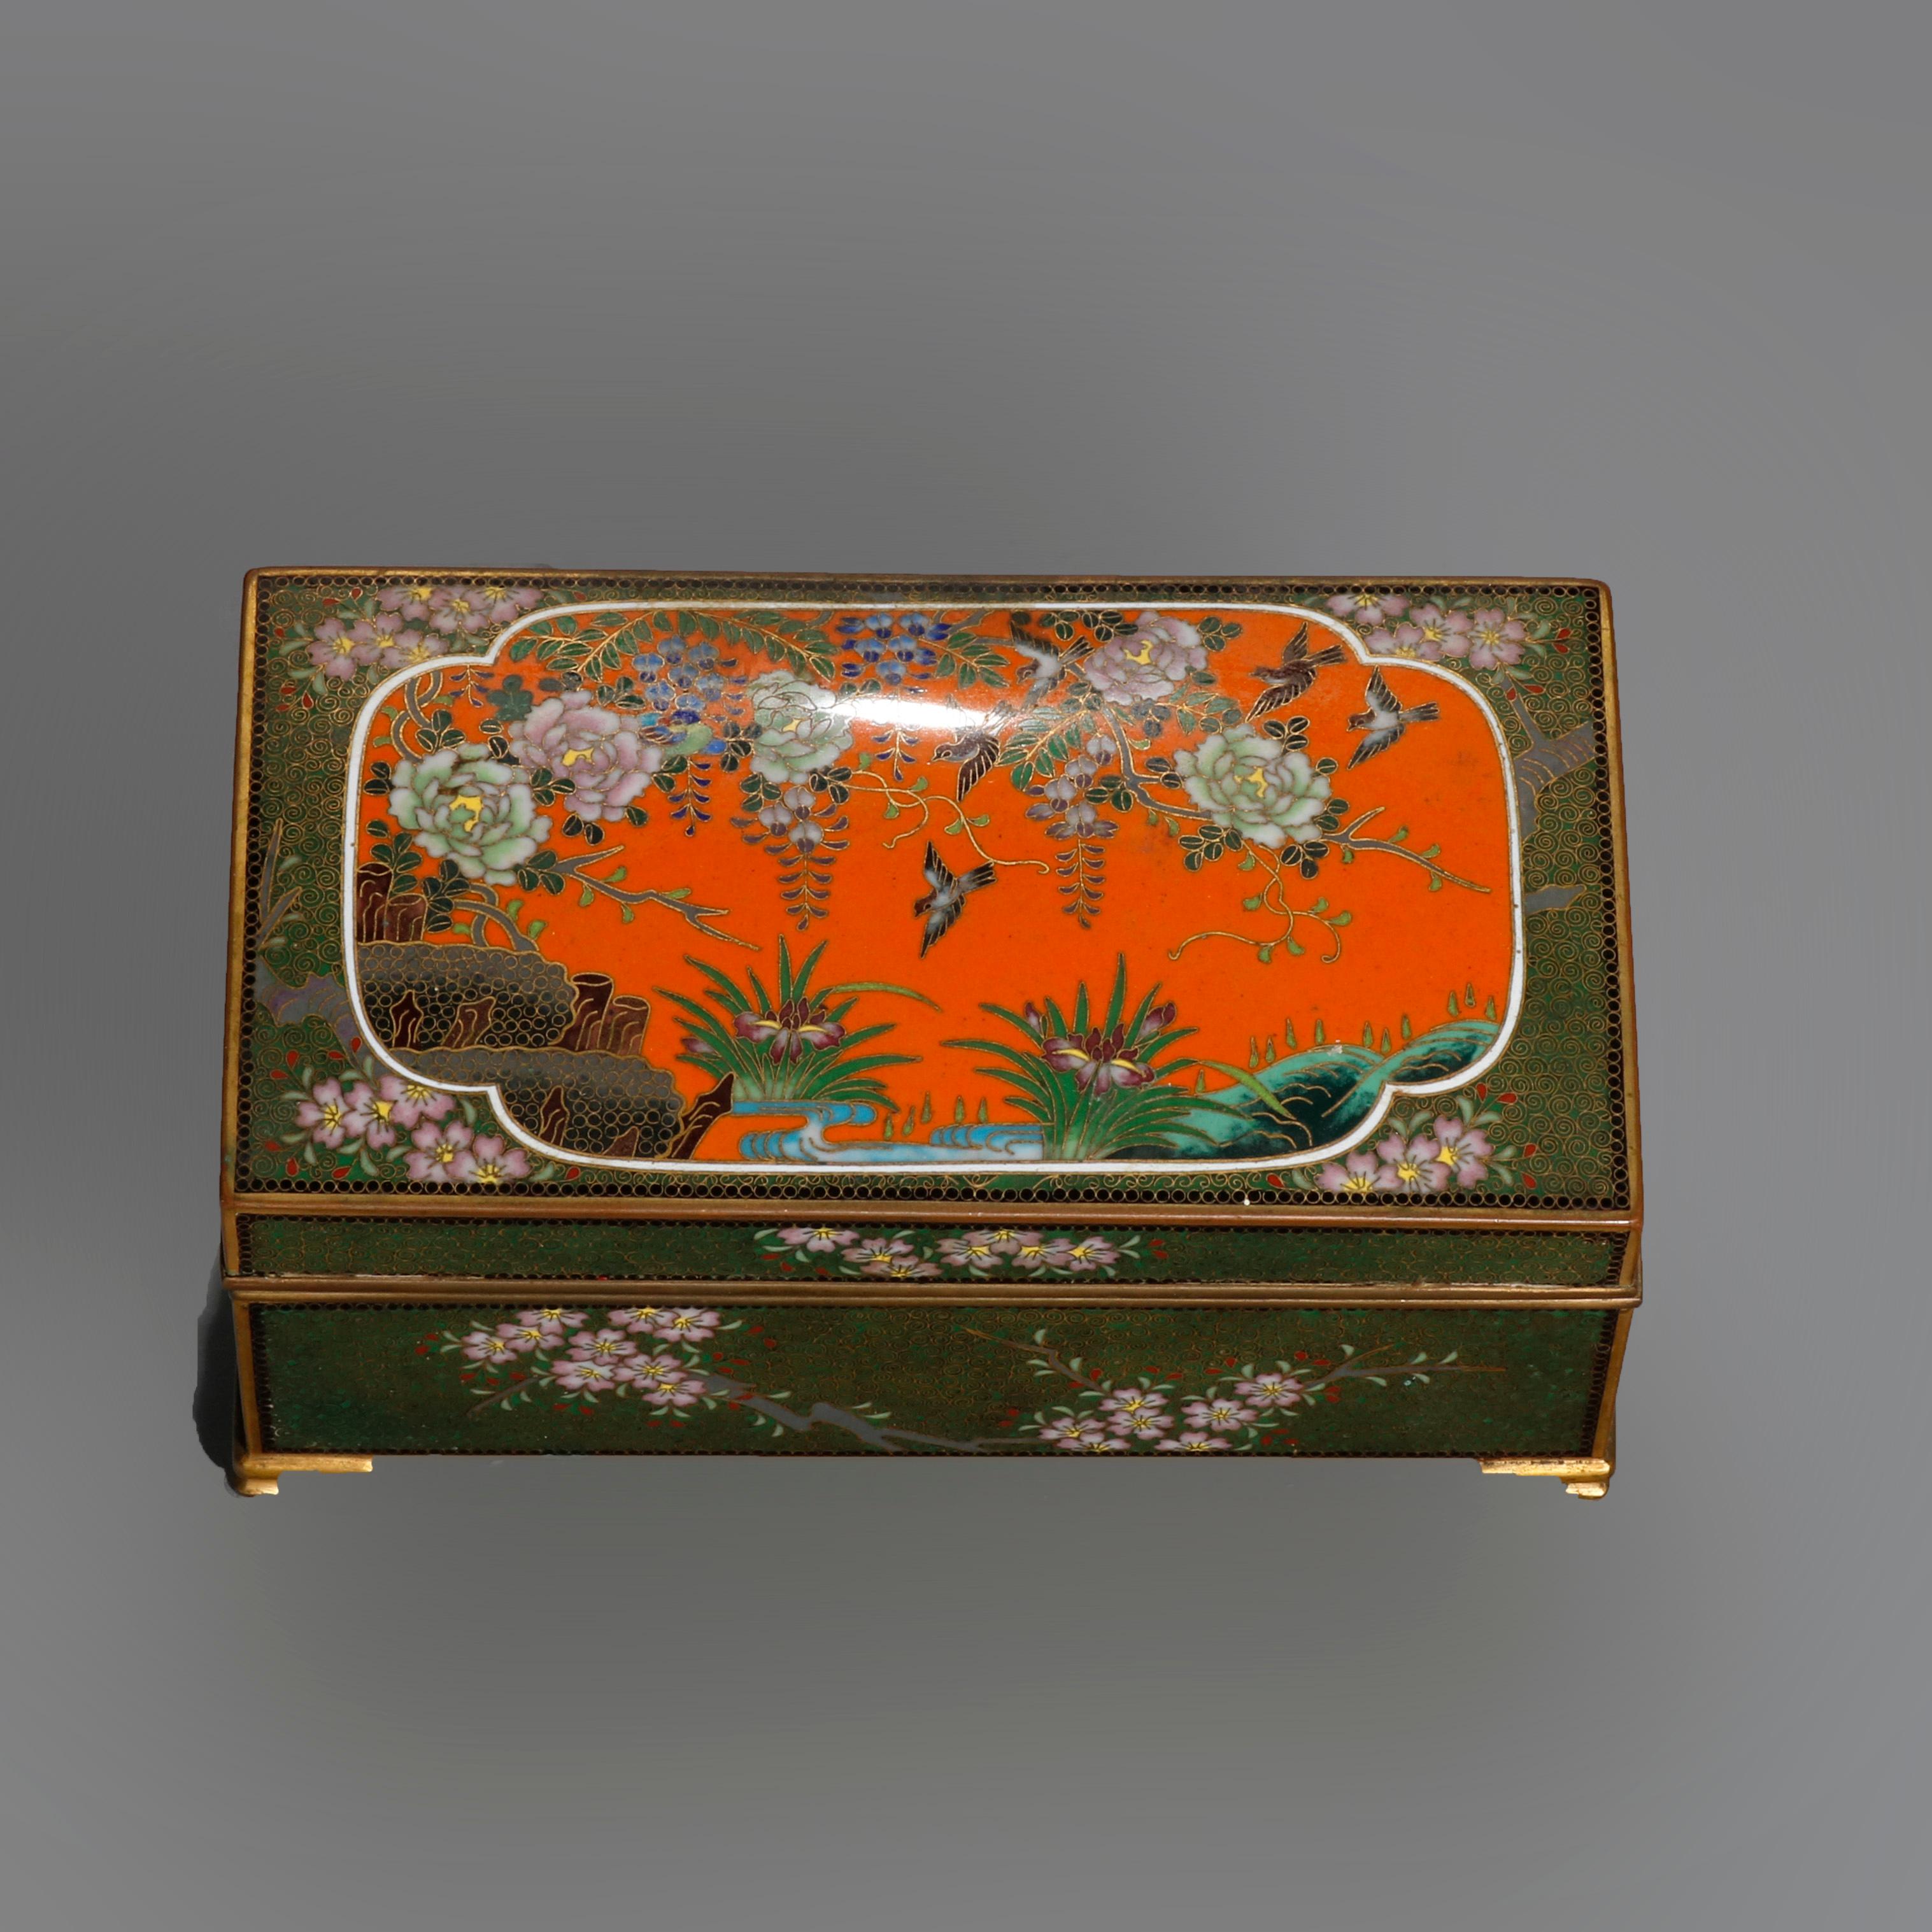 An antique Chinese dresser trinket box offers bronze construction with domed lid and Cloisonne enameled garden decoration having flowers and butterfly, circa 1900

Measures- 2.75